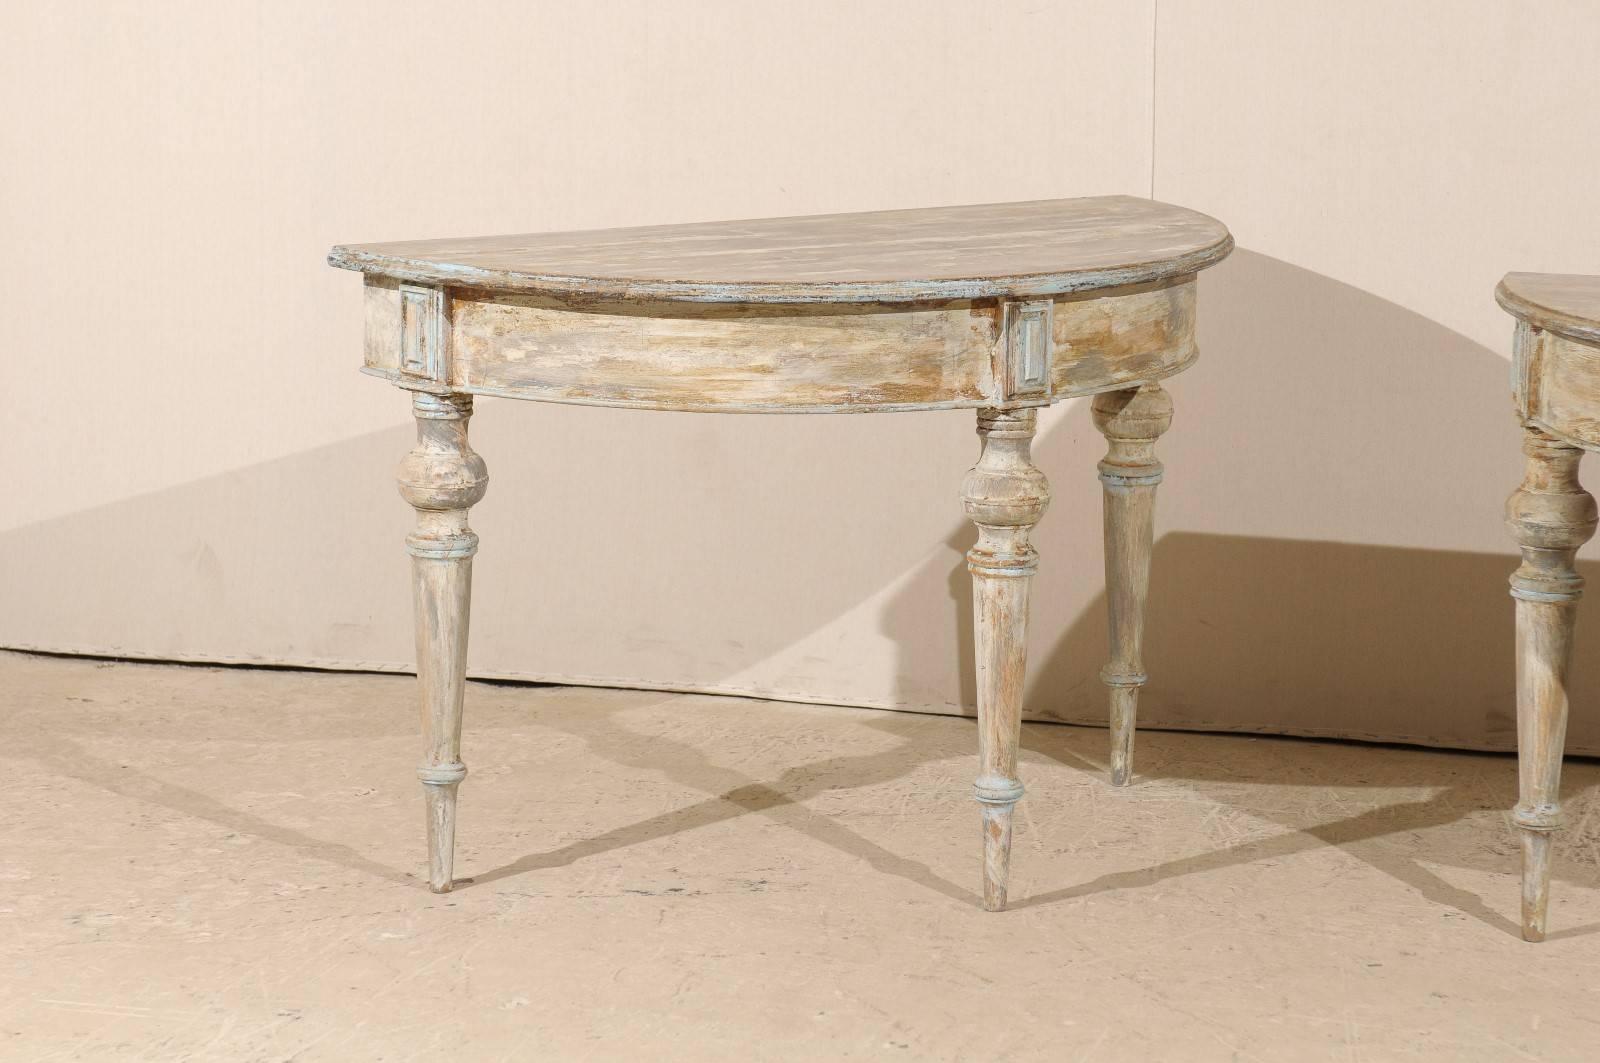 Pair of 19th Century Swedish Demilune Tables in Taupe, Cream & Soft Blue Colors 1